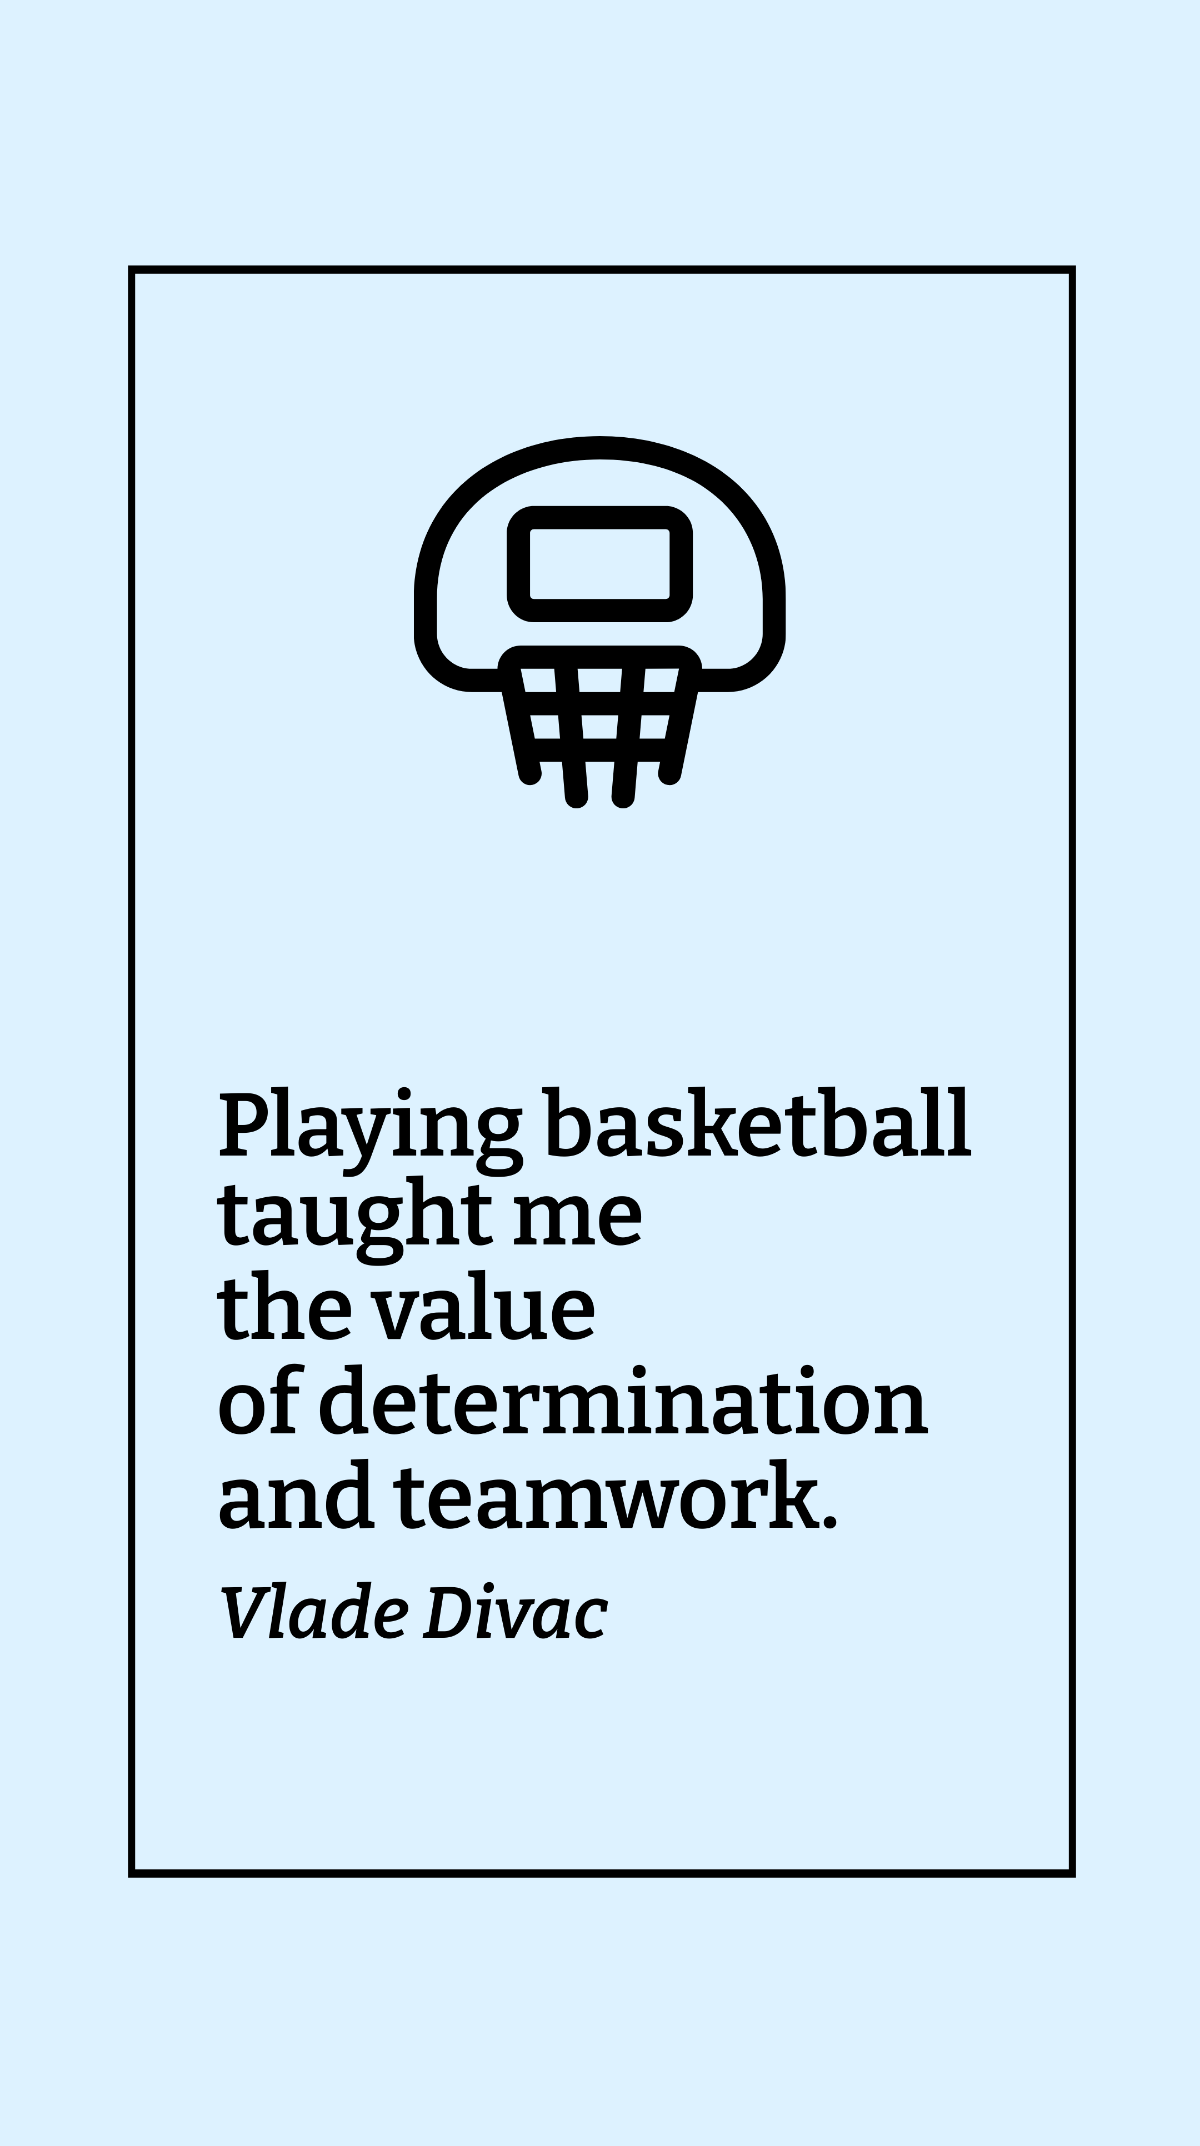 Vlade Divac - Playing basketball taught me the value of determination and teamwork. Template